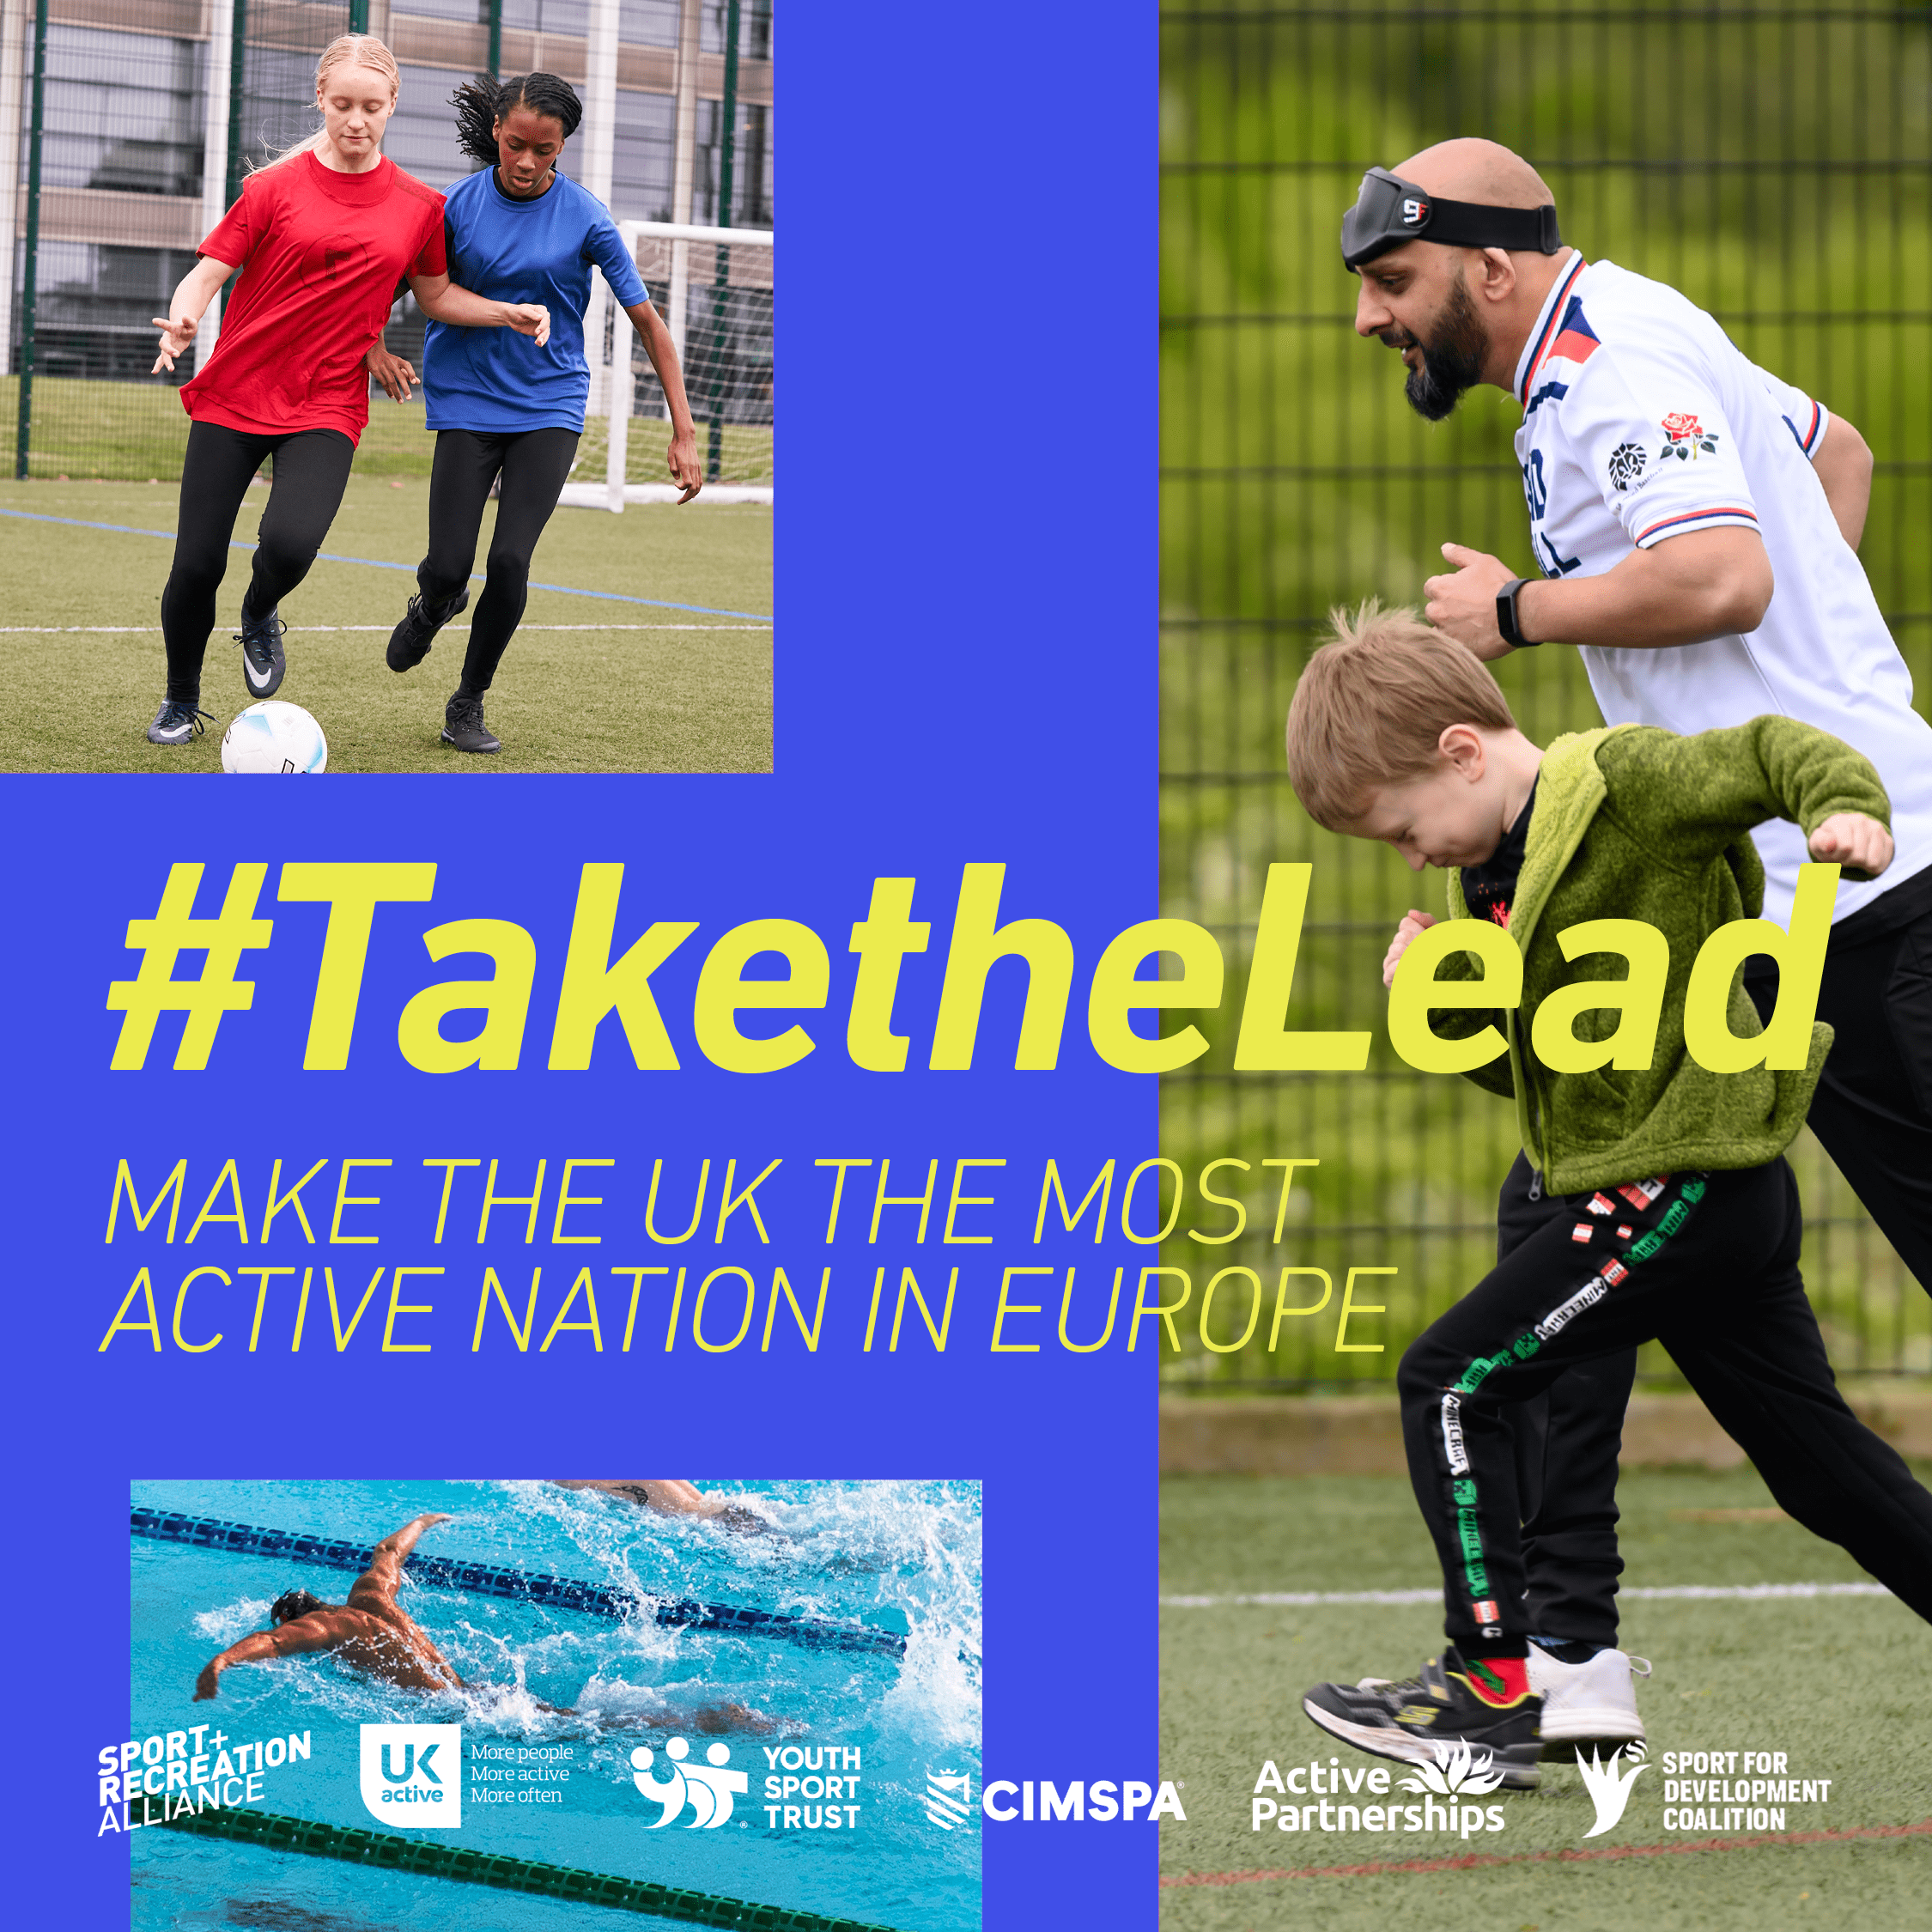 We’re adding our voice to #TakeTheLead campaign